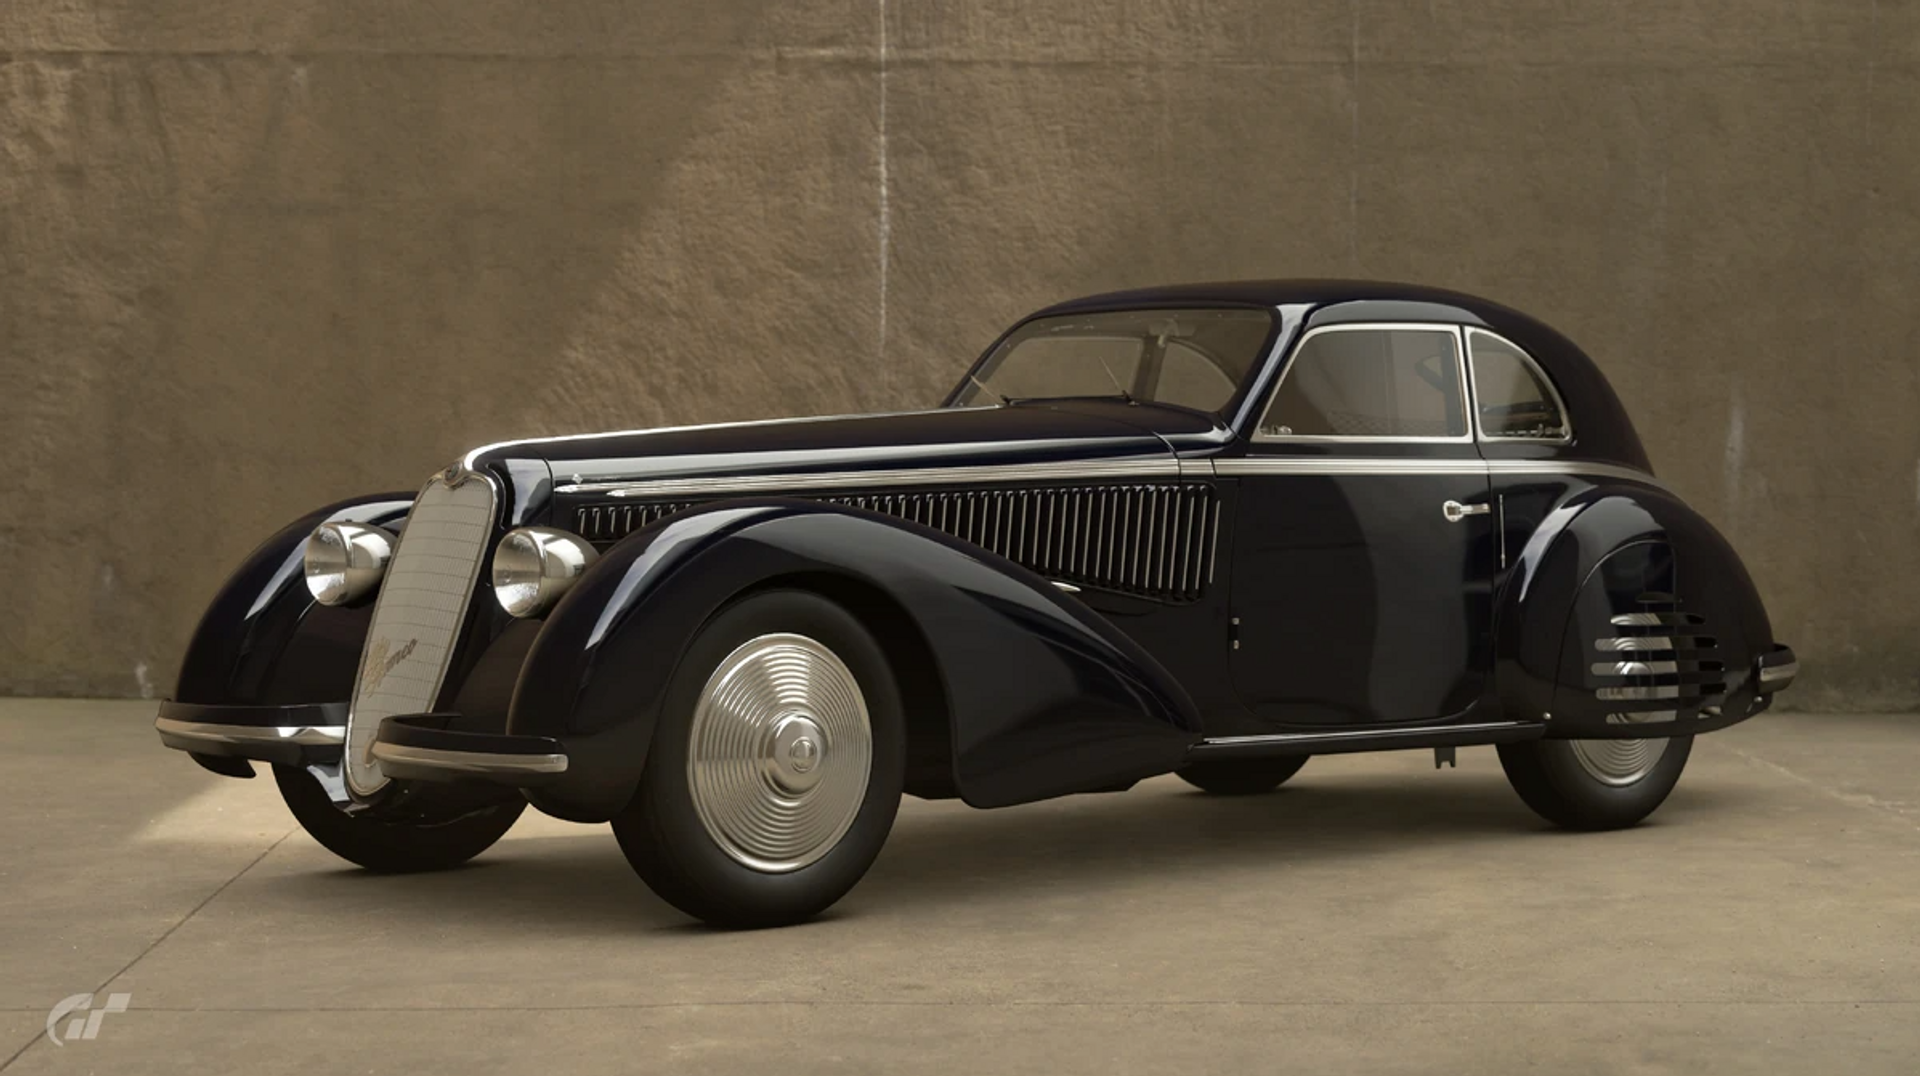 1939 ALFA ROMEO 8C 2900B TOURING BERLINETTA. The black car has a prolonged bonnet, and is pictured against a concrete background